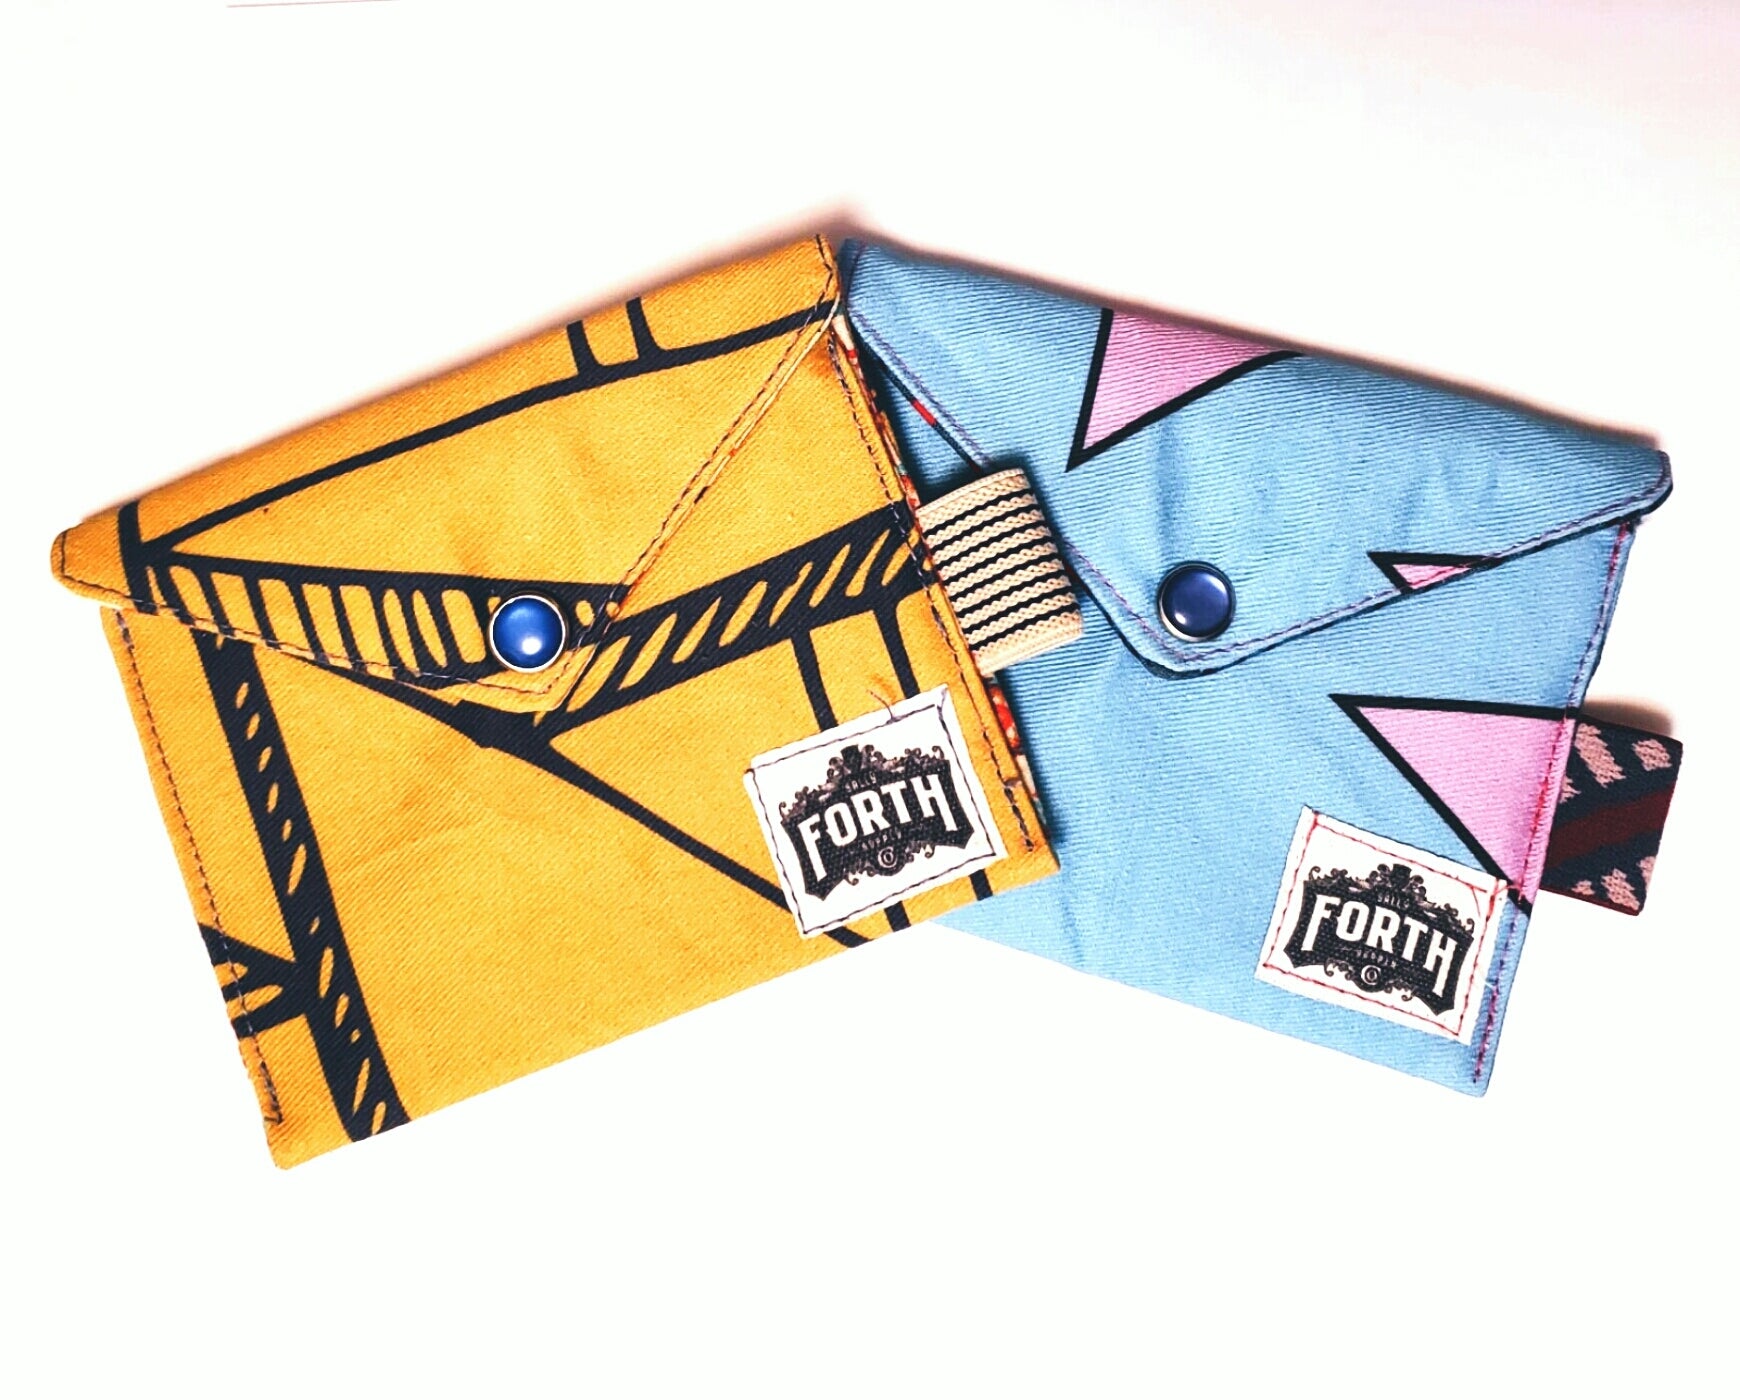 The Original Chapstick Wallet! The Avail: Rokko - Sally Forth Supply Co.